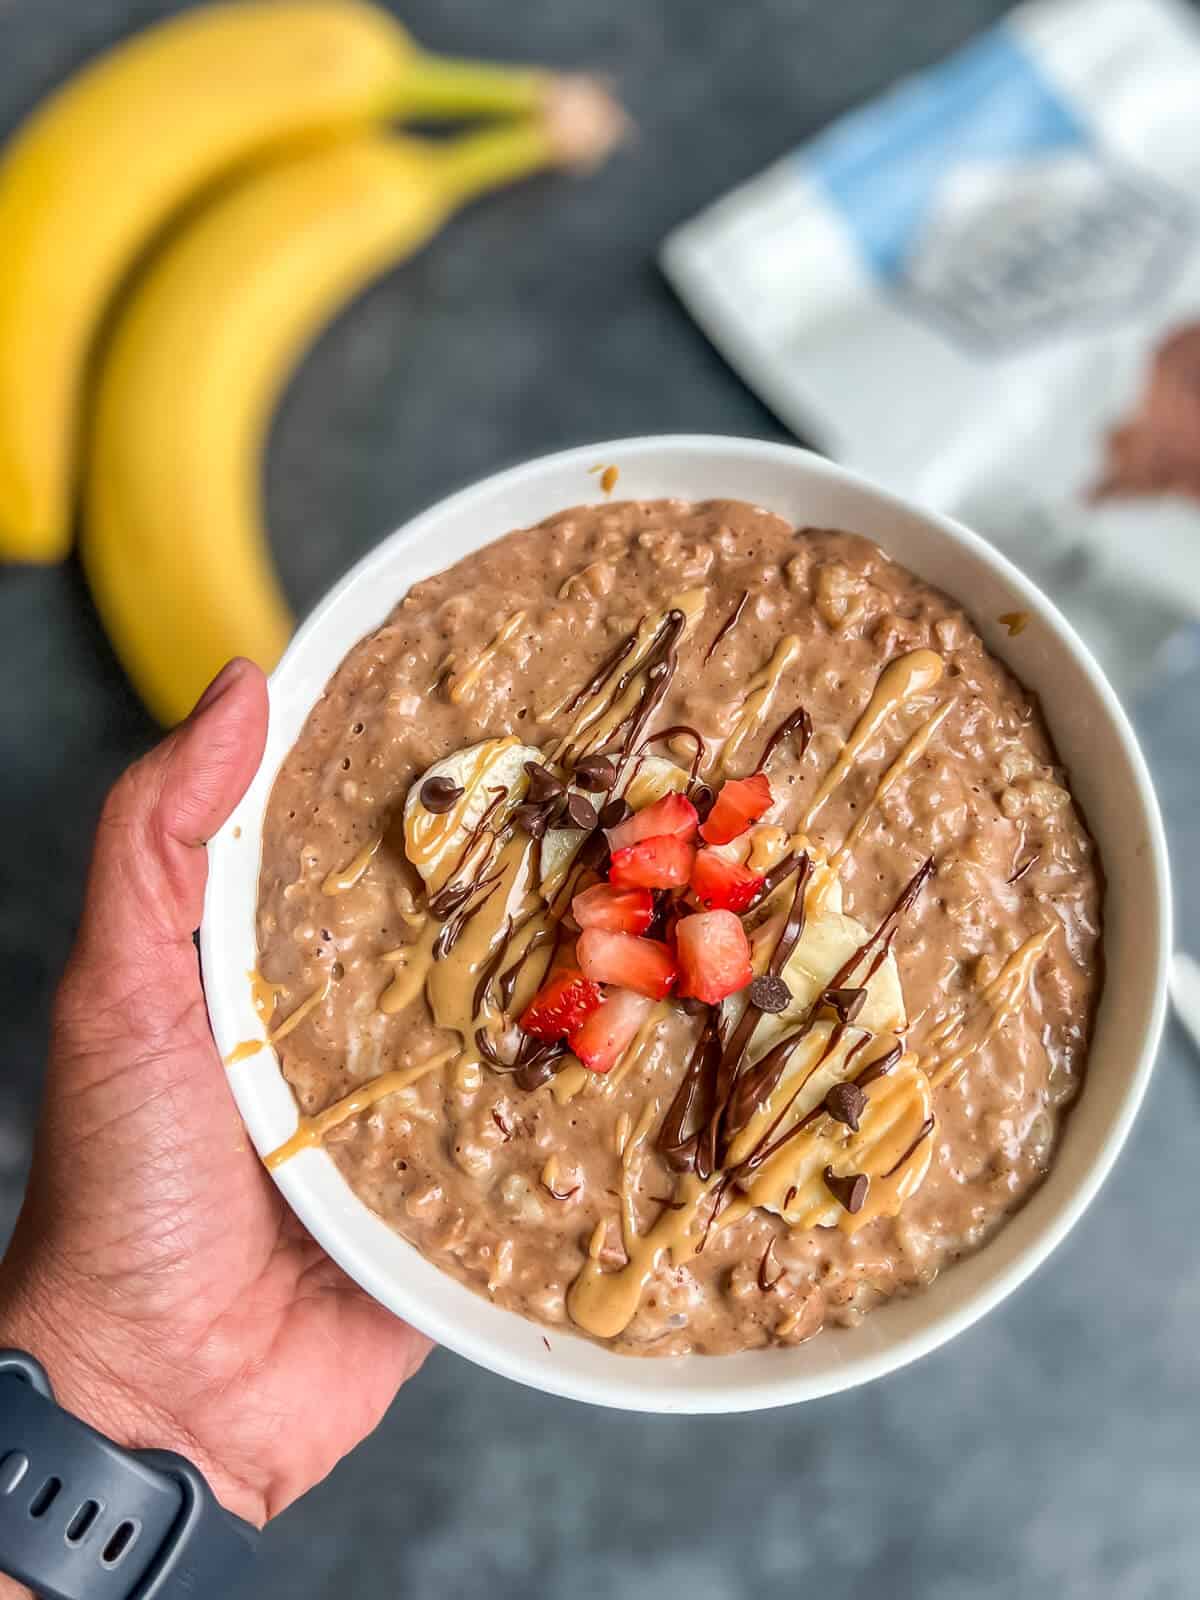 A hand holding a white bowl with chocolate peanut butter oats topped with banana and strawberry with a banana in the top left corner.